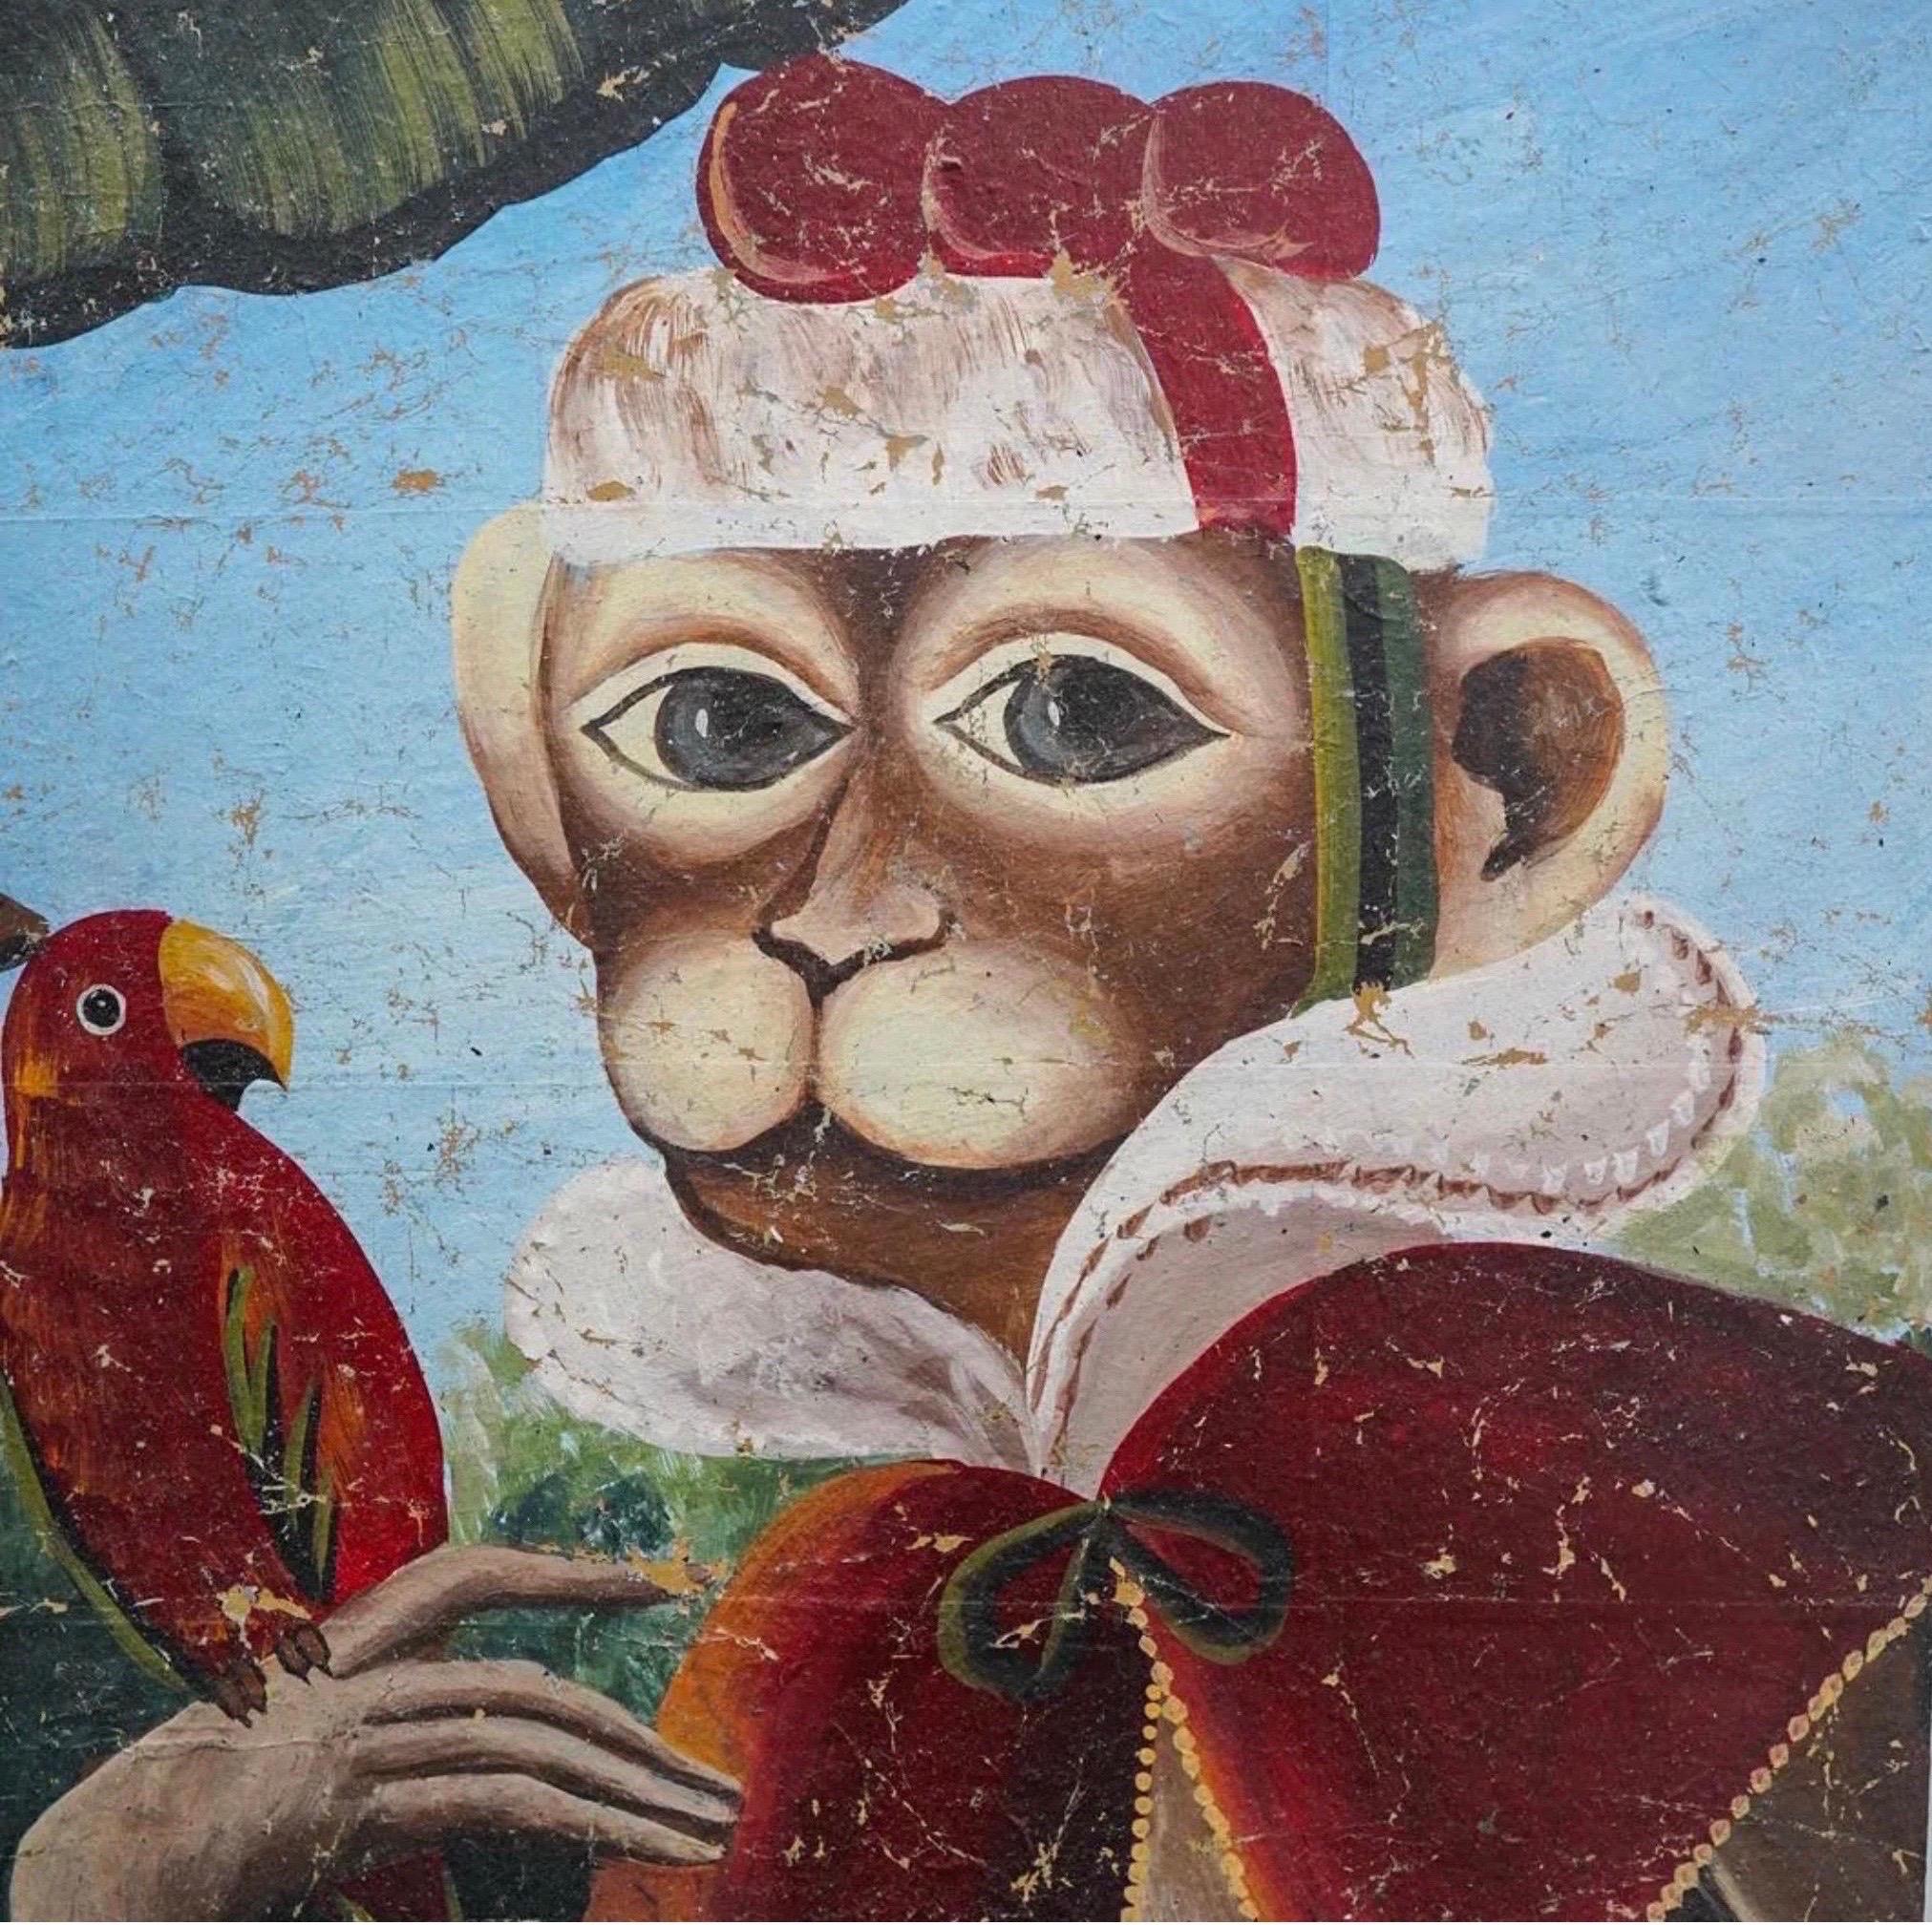 A vintage privacy panel of room divider screen with decorative monkey playing instrument motif, composed of paper mache with wood framed foundation.